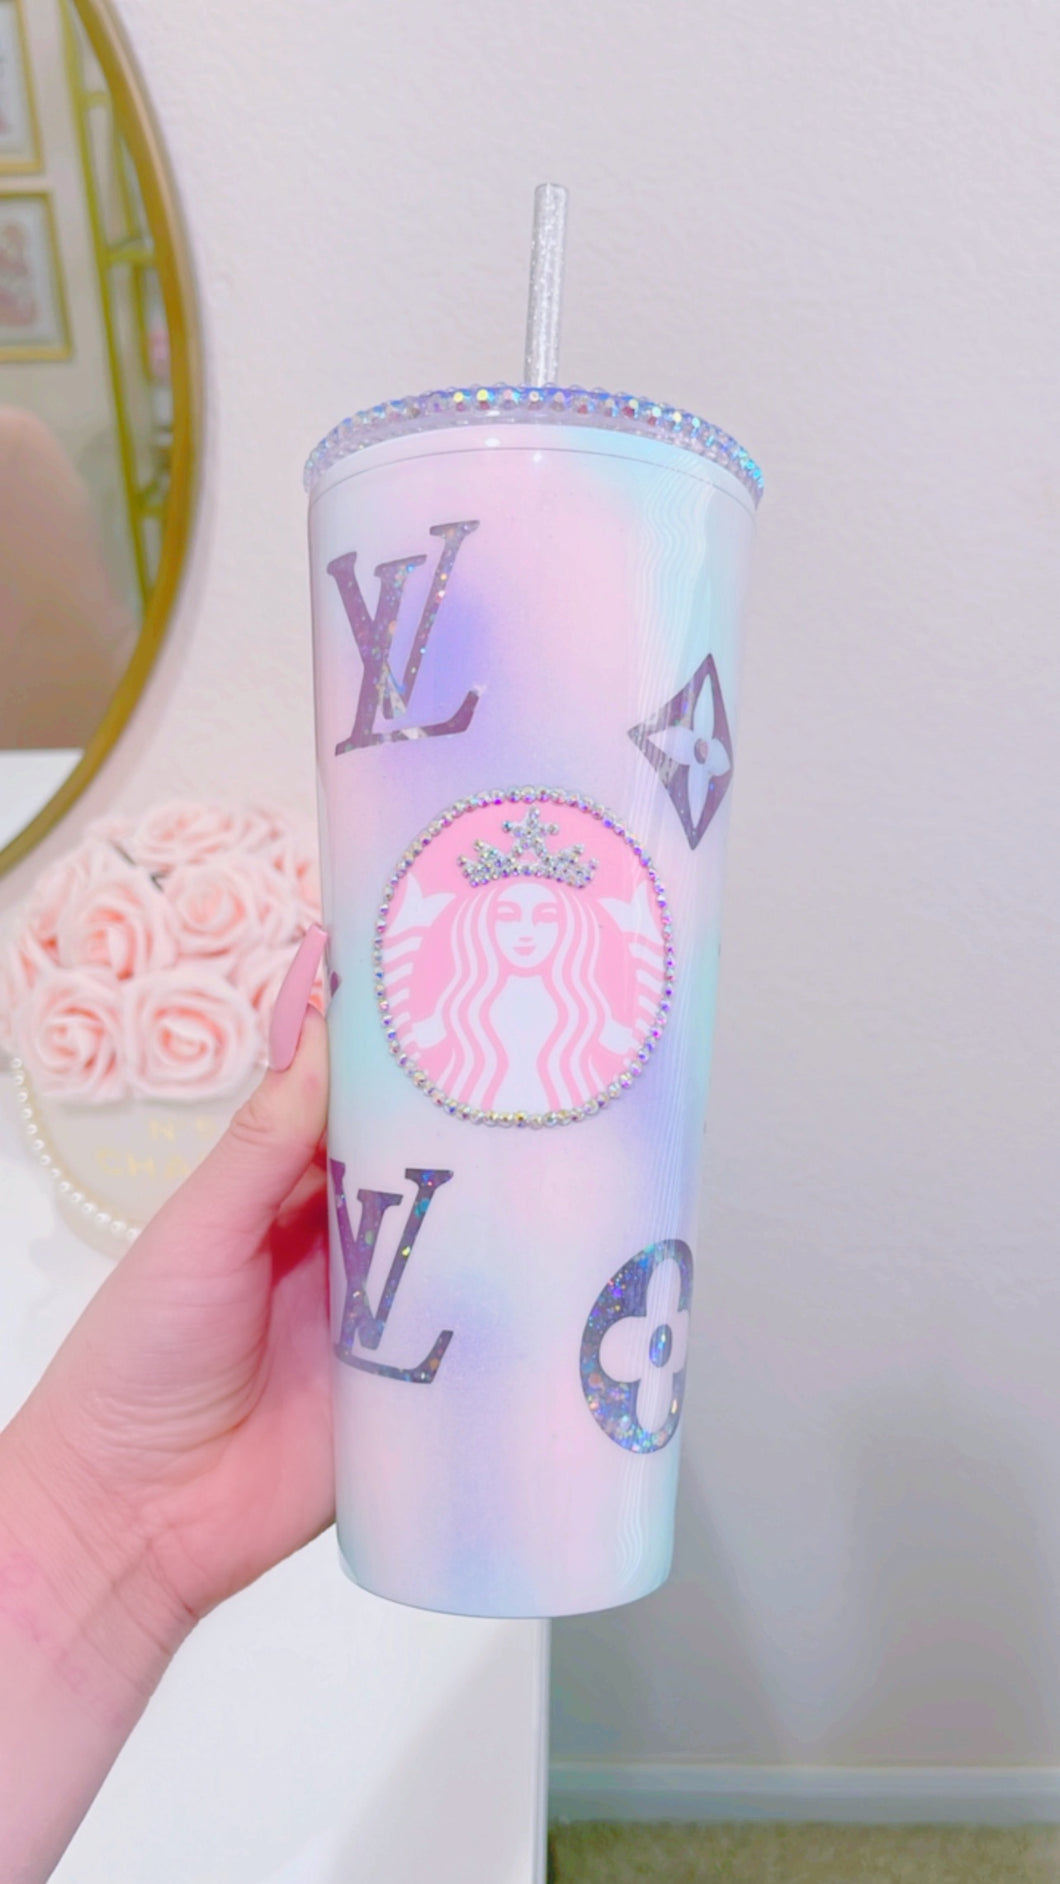 Louis Vuitton Starbucks Cup With Name 